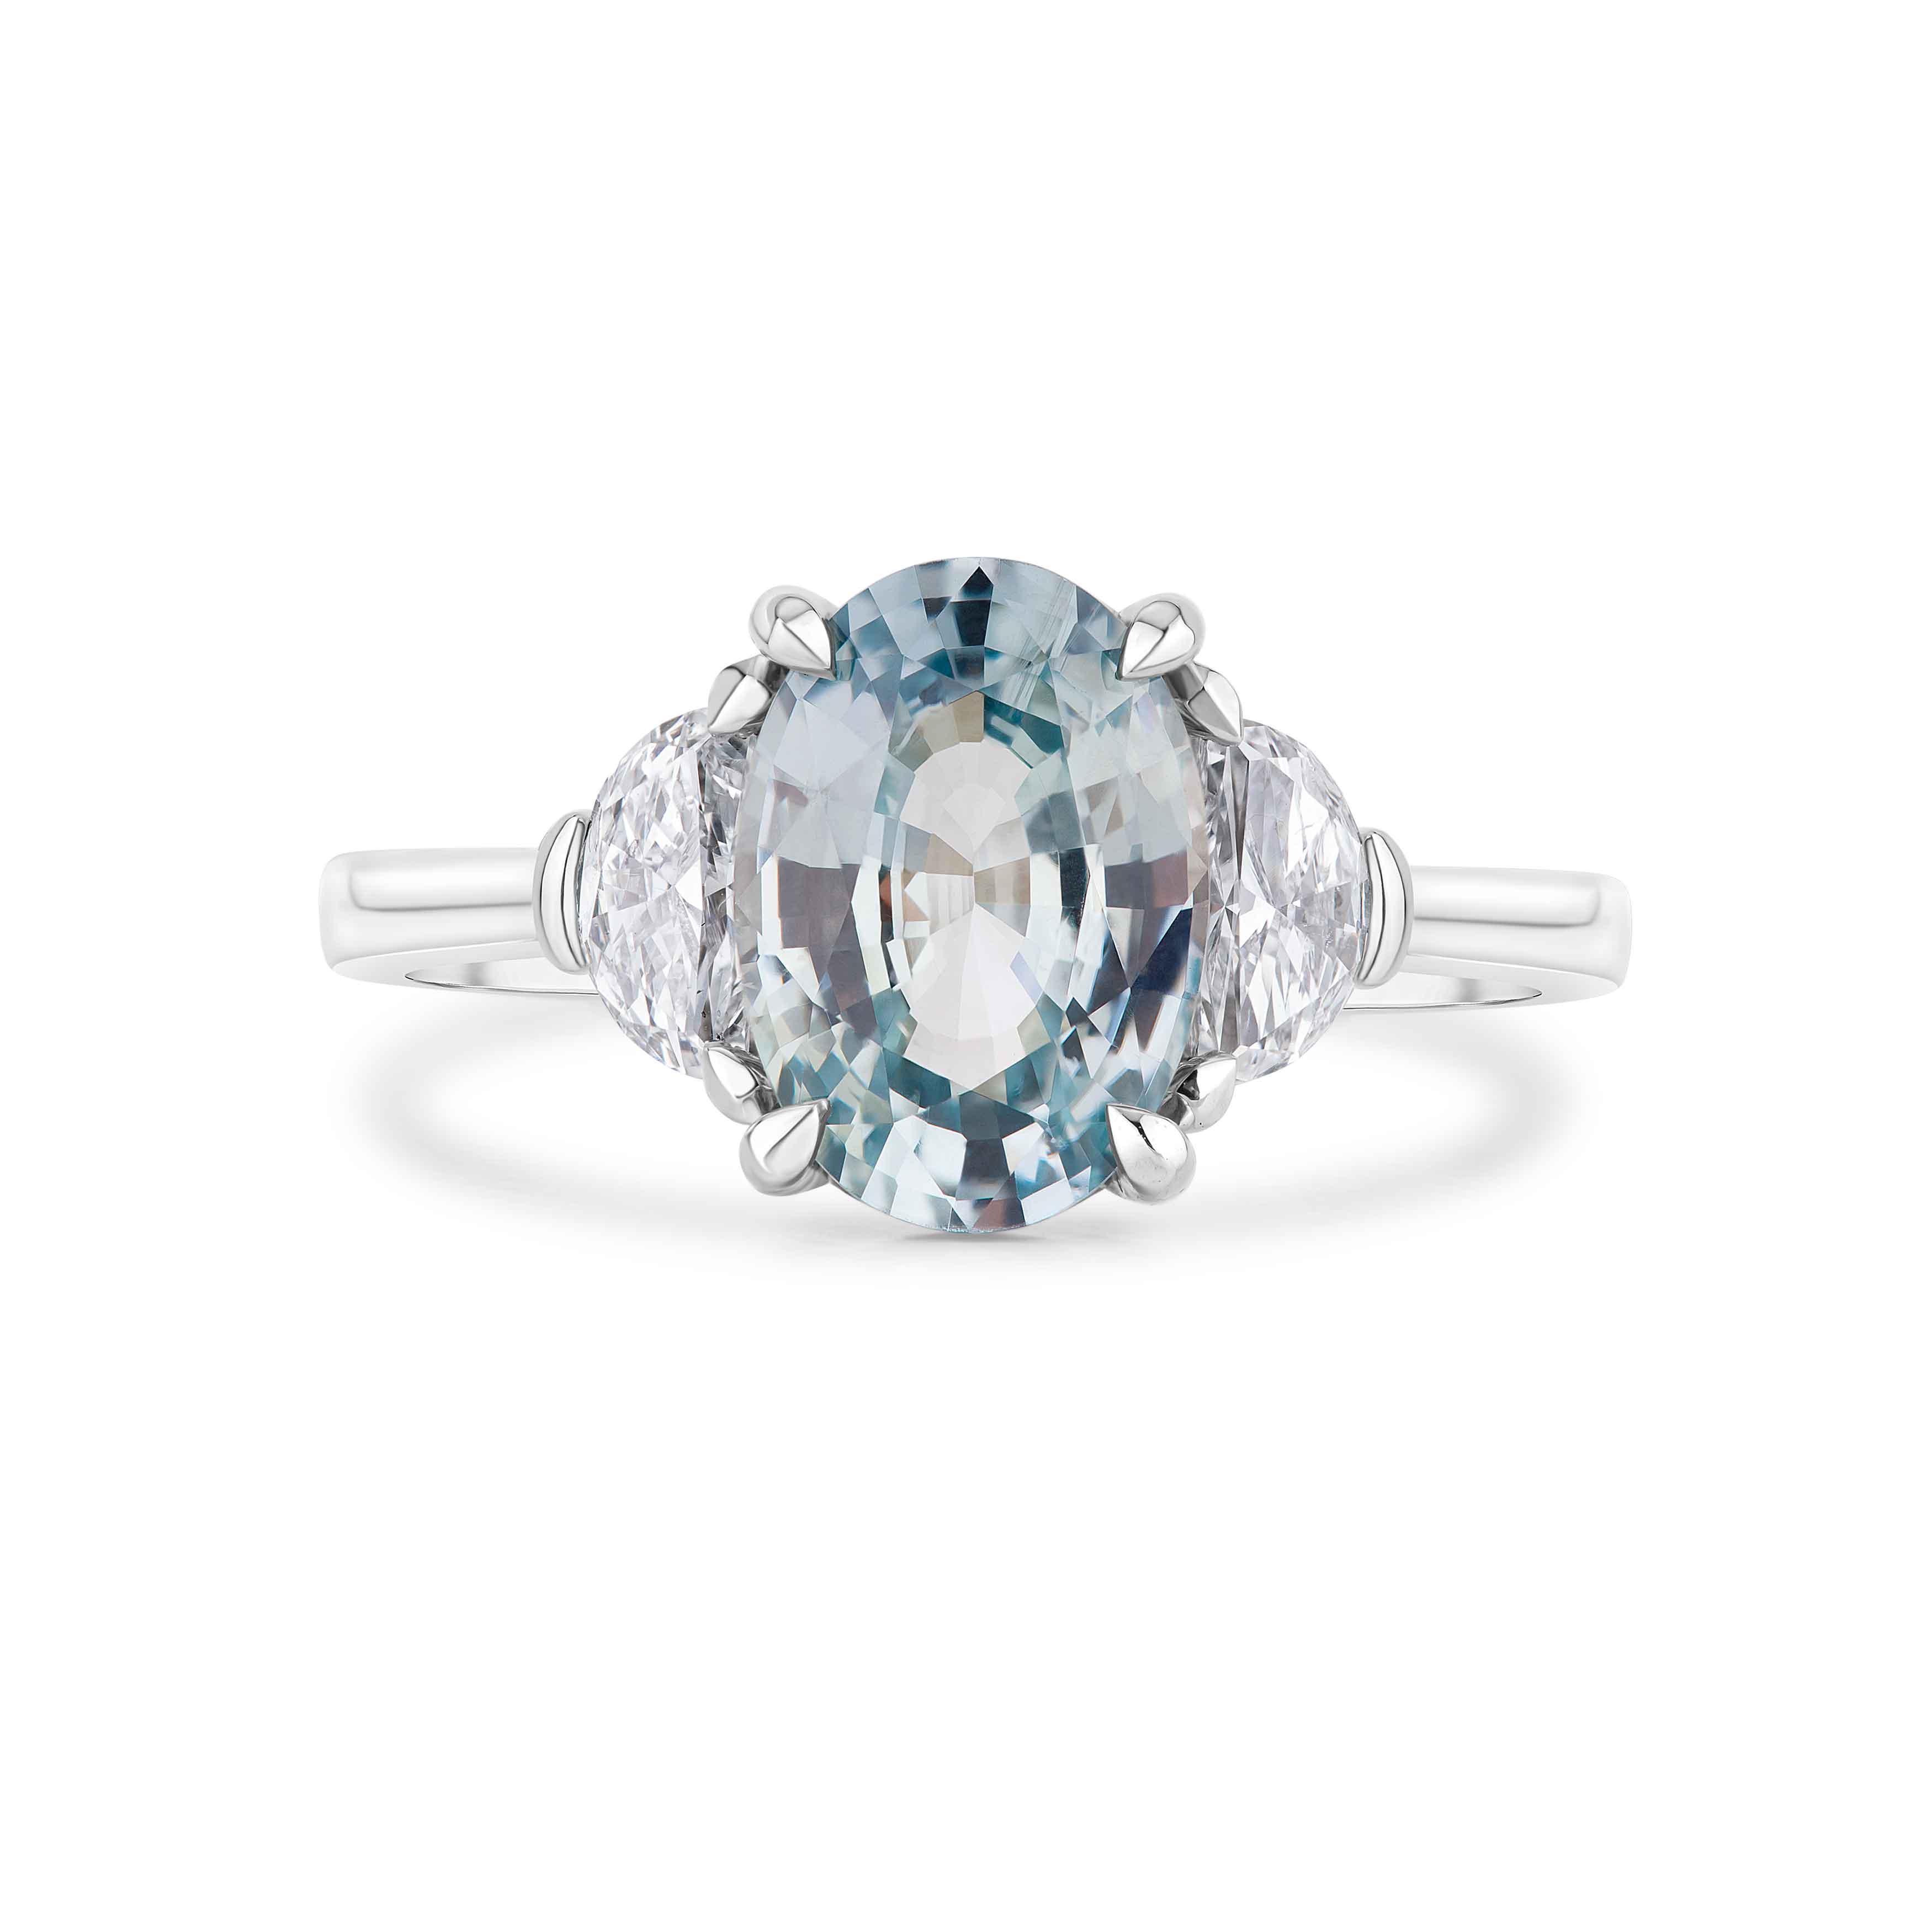 Moira Patience Fine Jewellery Ghlas Oval Pale Blue Sapphire and Diamond Engagement Ring in Edinburgh